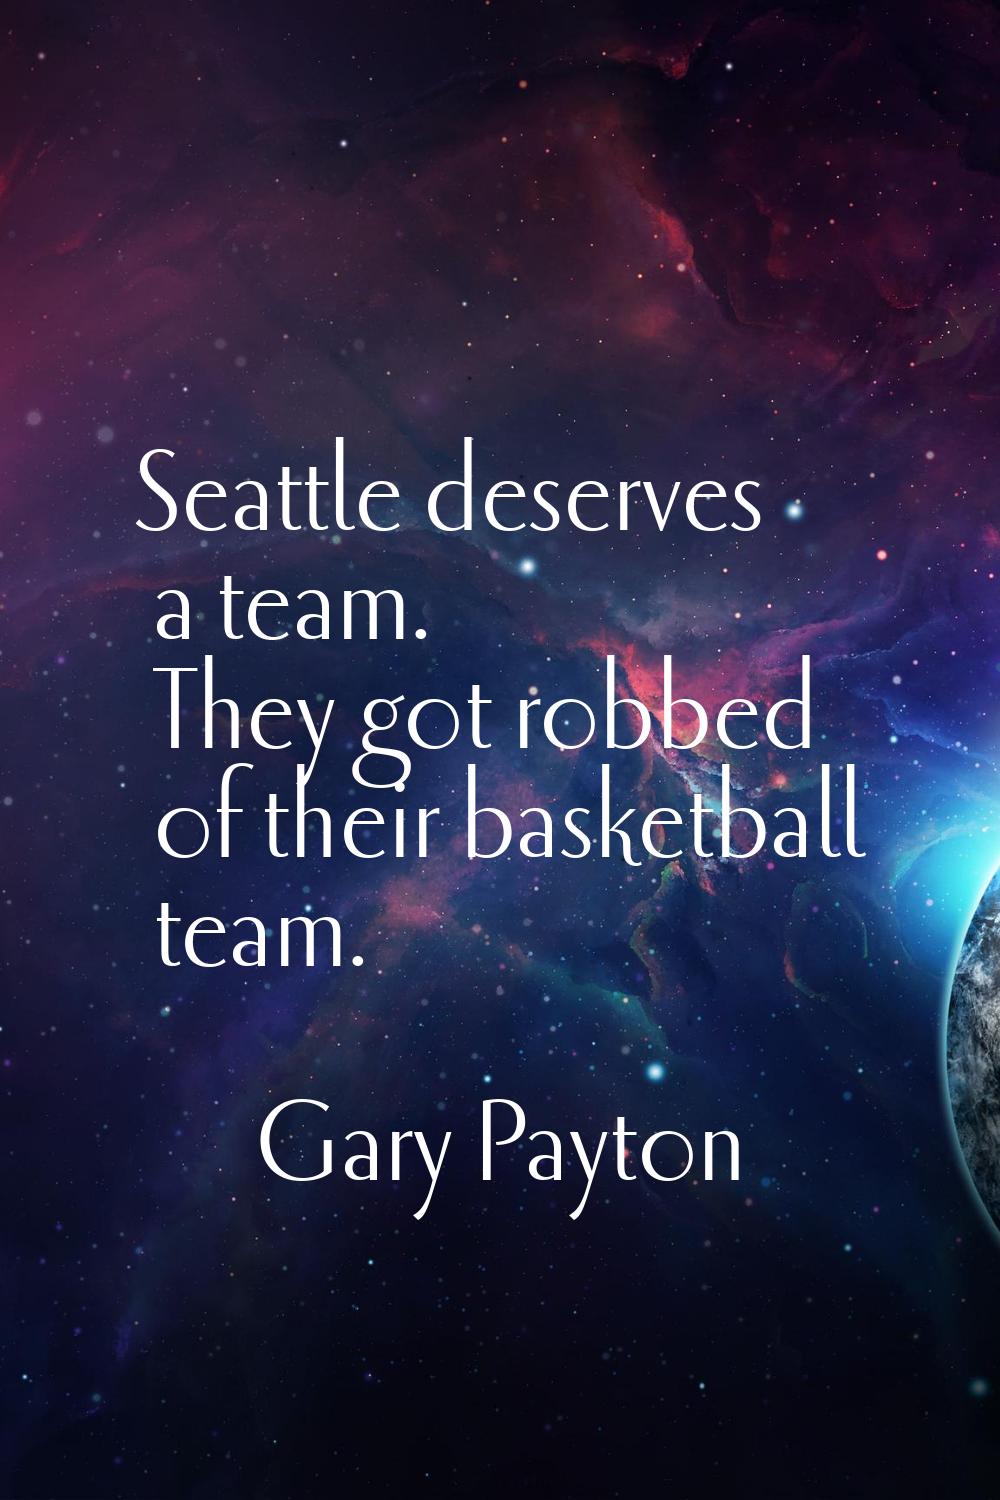 Seattle deserves a team. They got robbed of their basketball team.